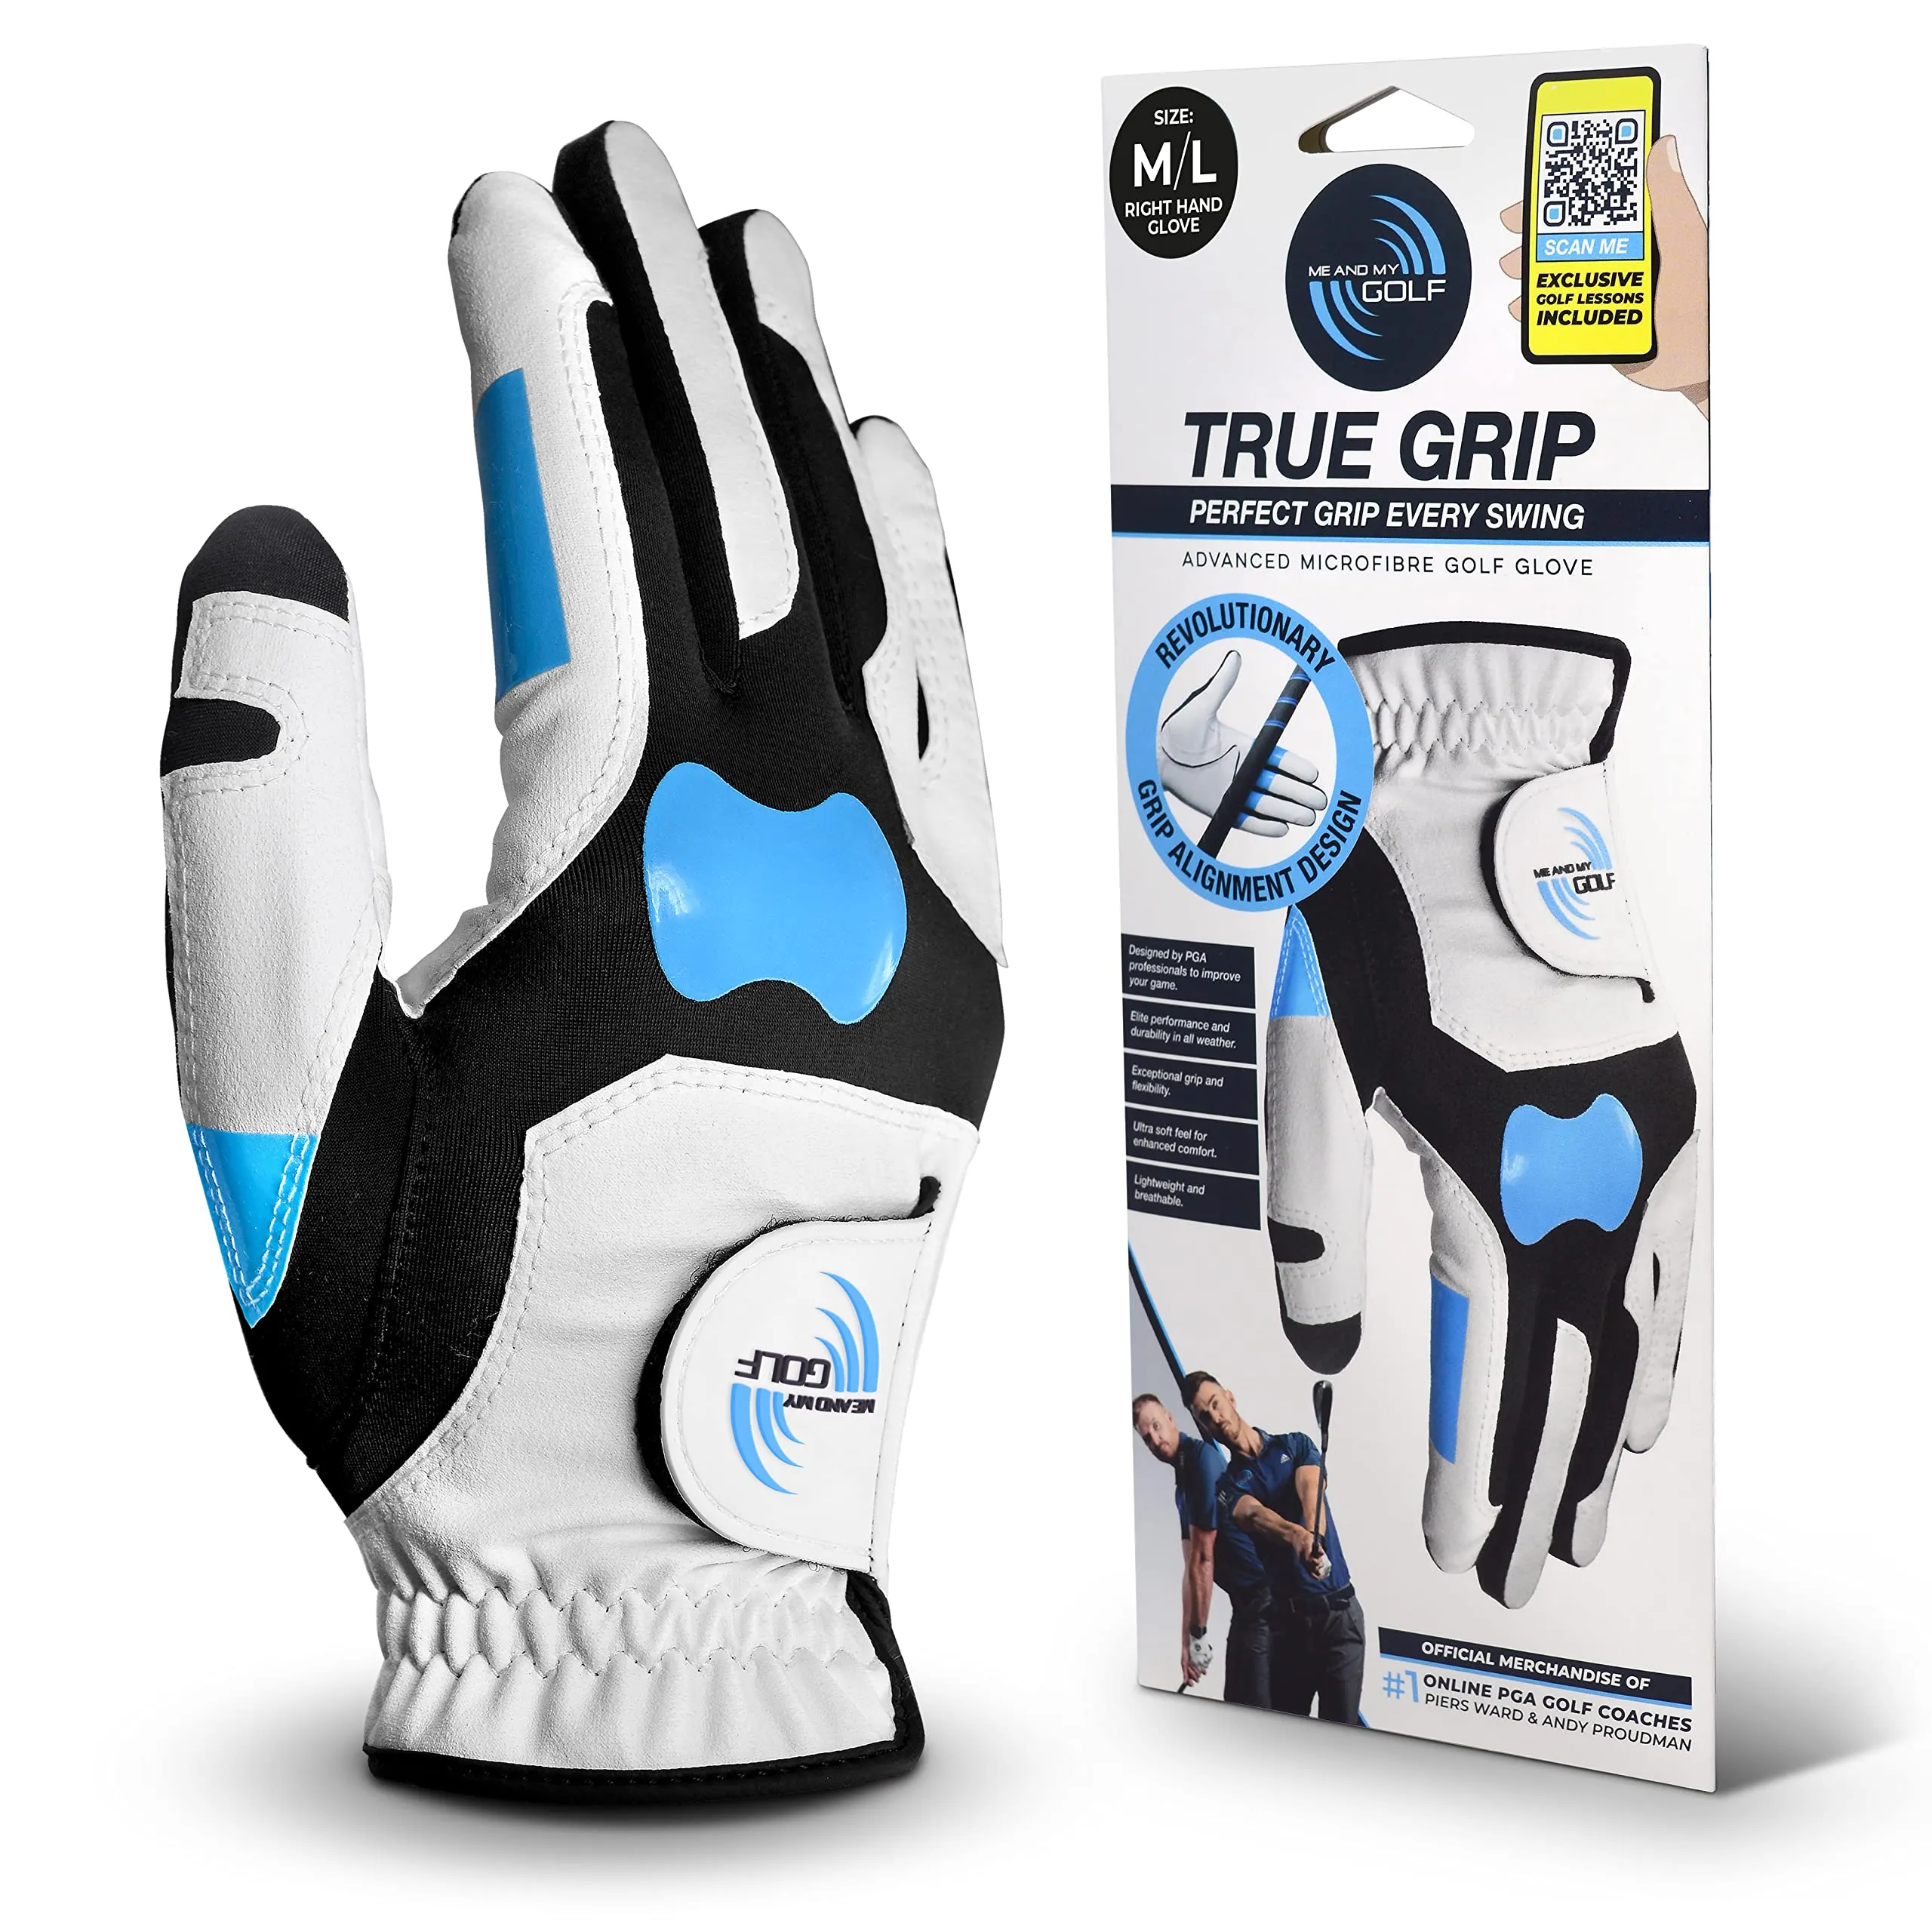 ME AND MY GOLF True Grip Training Golf Glove - Perfect Grip Every Swing - Size M/L Right Hand